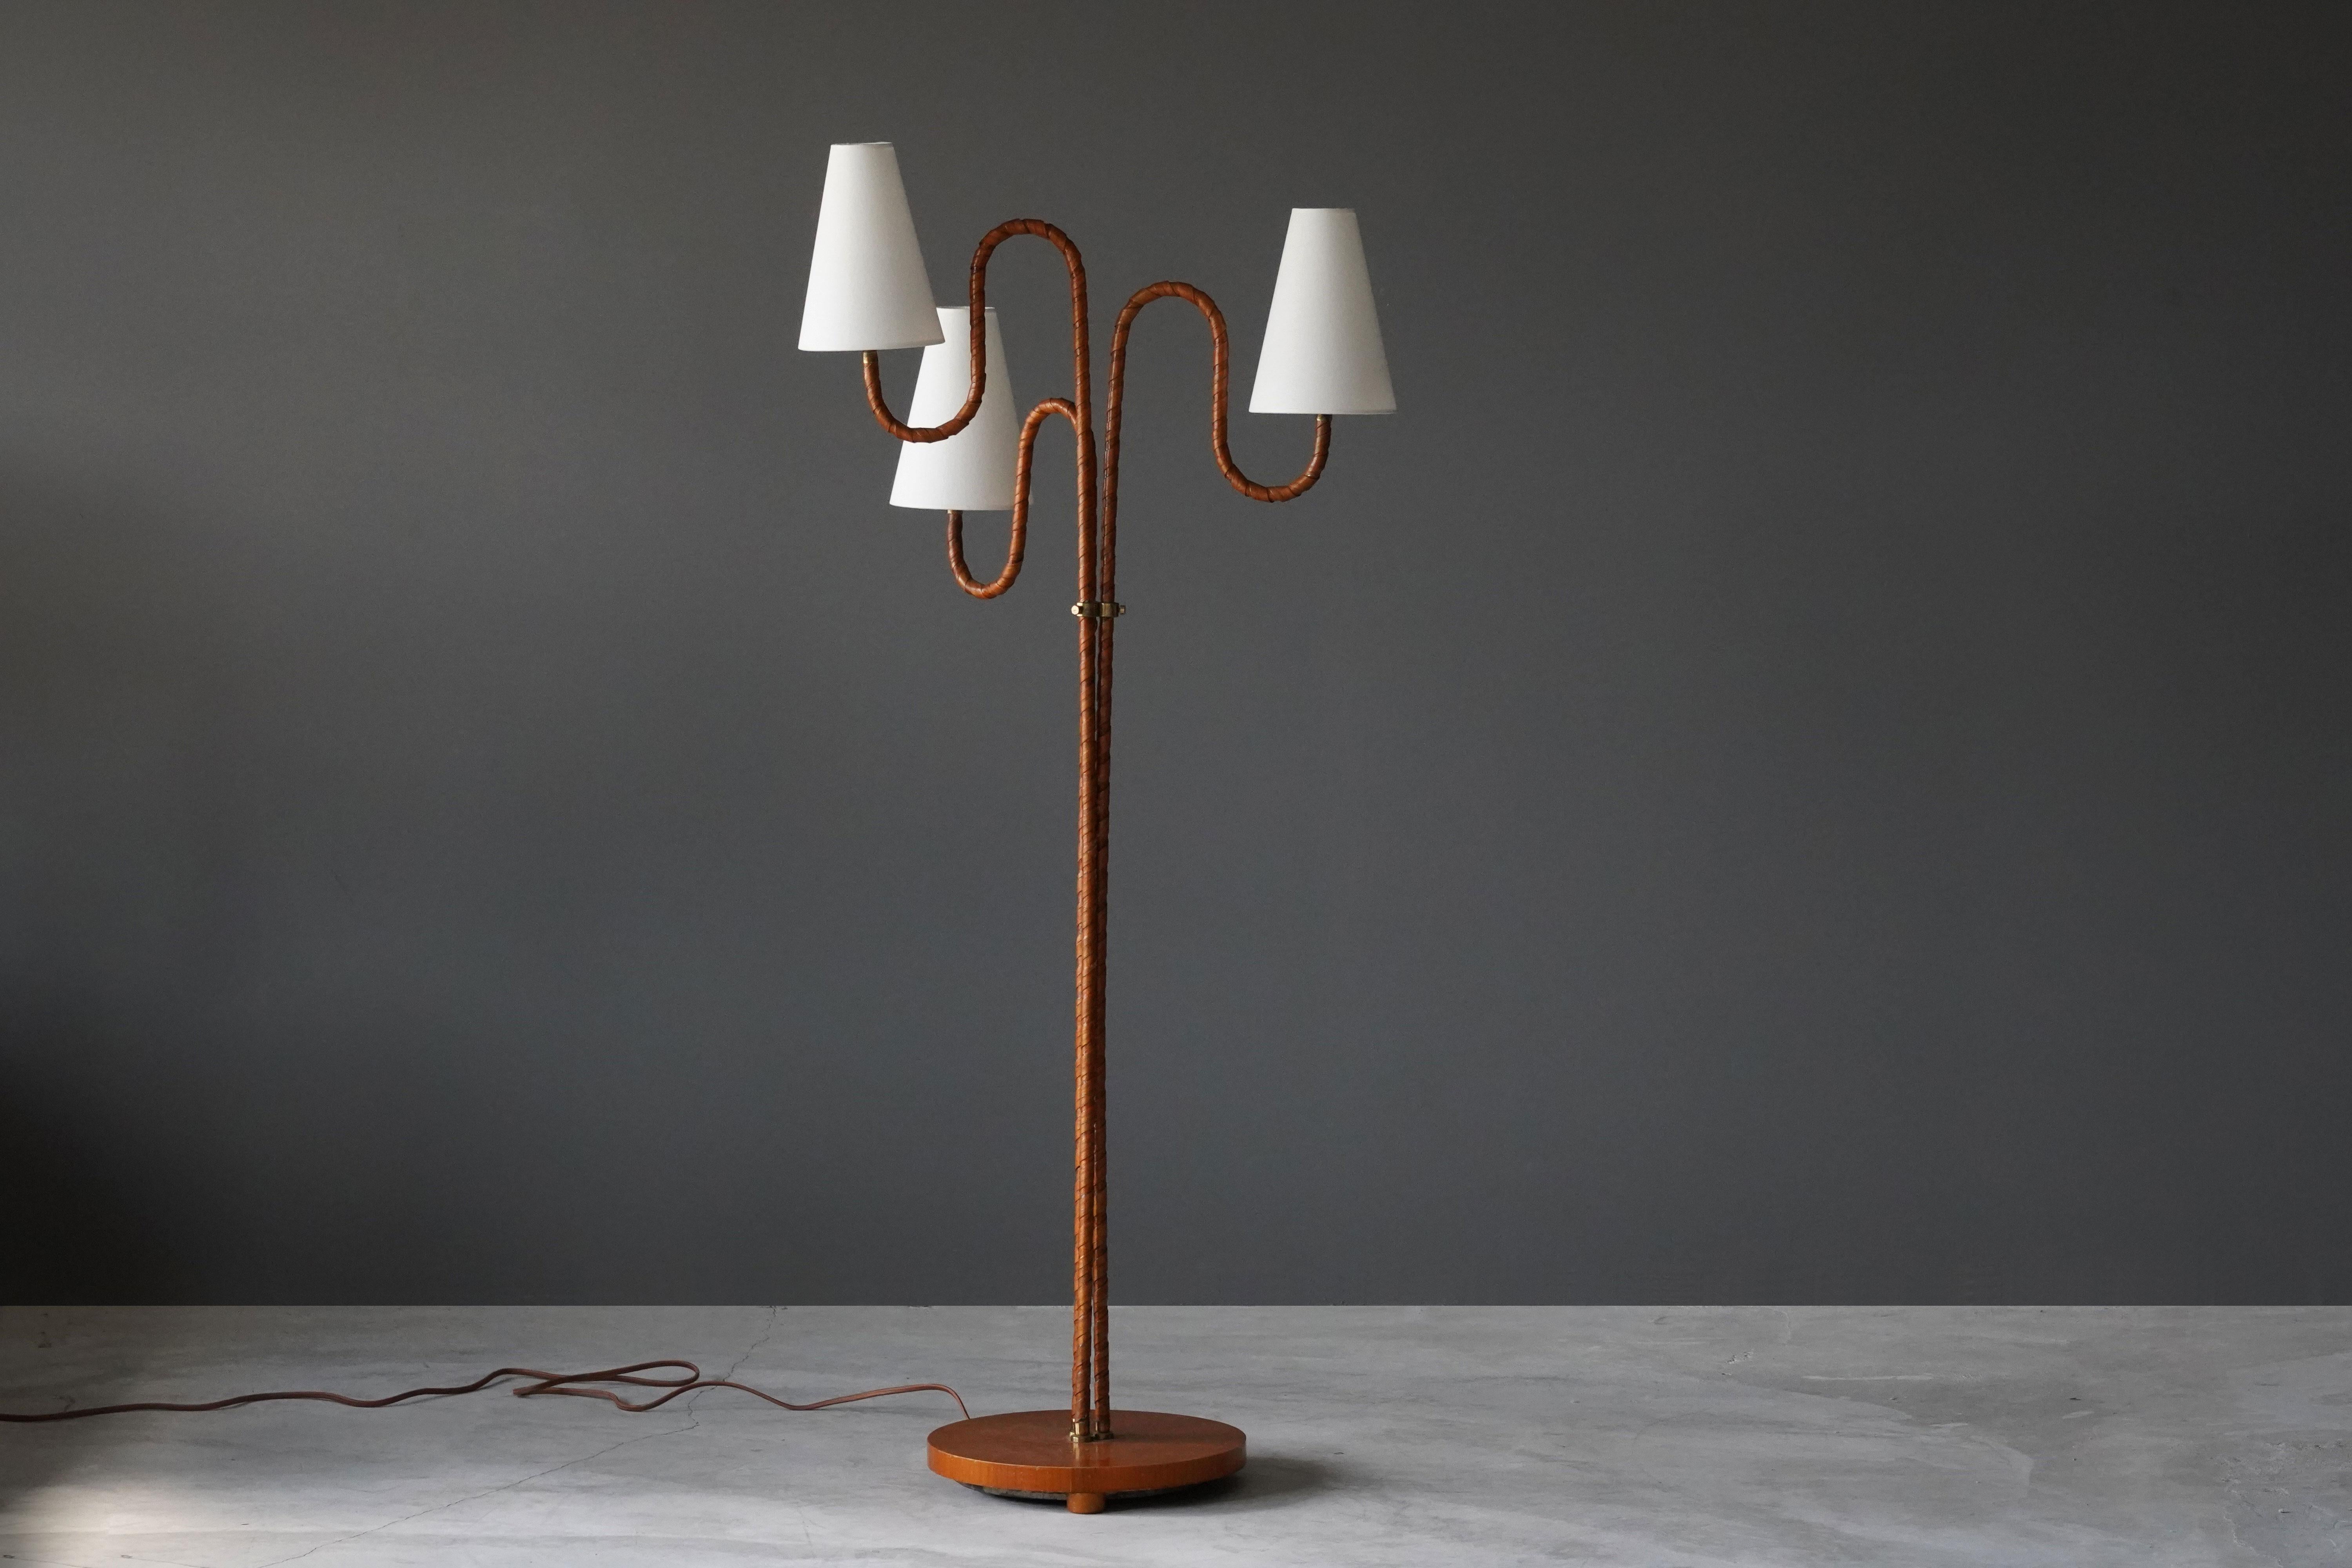 An organic three-armed floor lamp. Designed by an unknown Swedish modernist designer, 1930s. Possibly manufactured by Böhlmarks. Produced in rattan, wood, linen, and brass. Arms adjustable. 

Other designers working in the organic style include